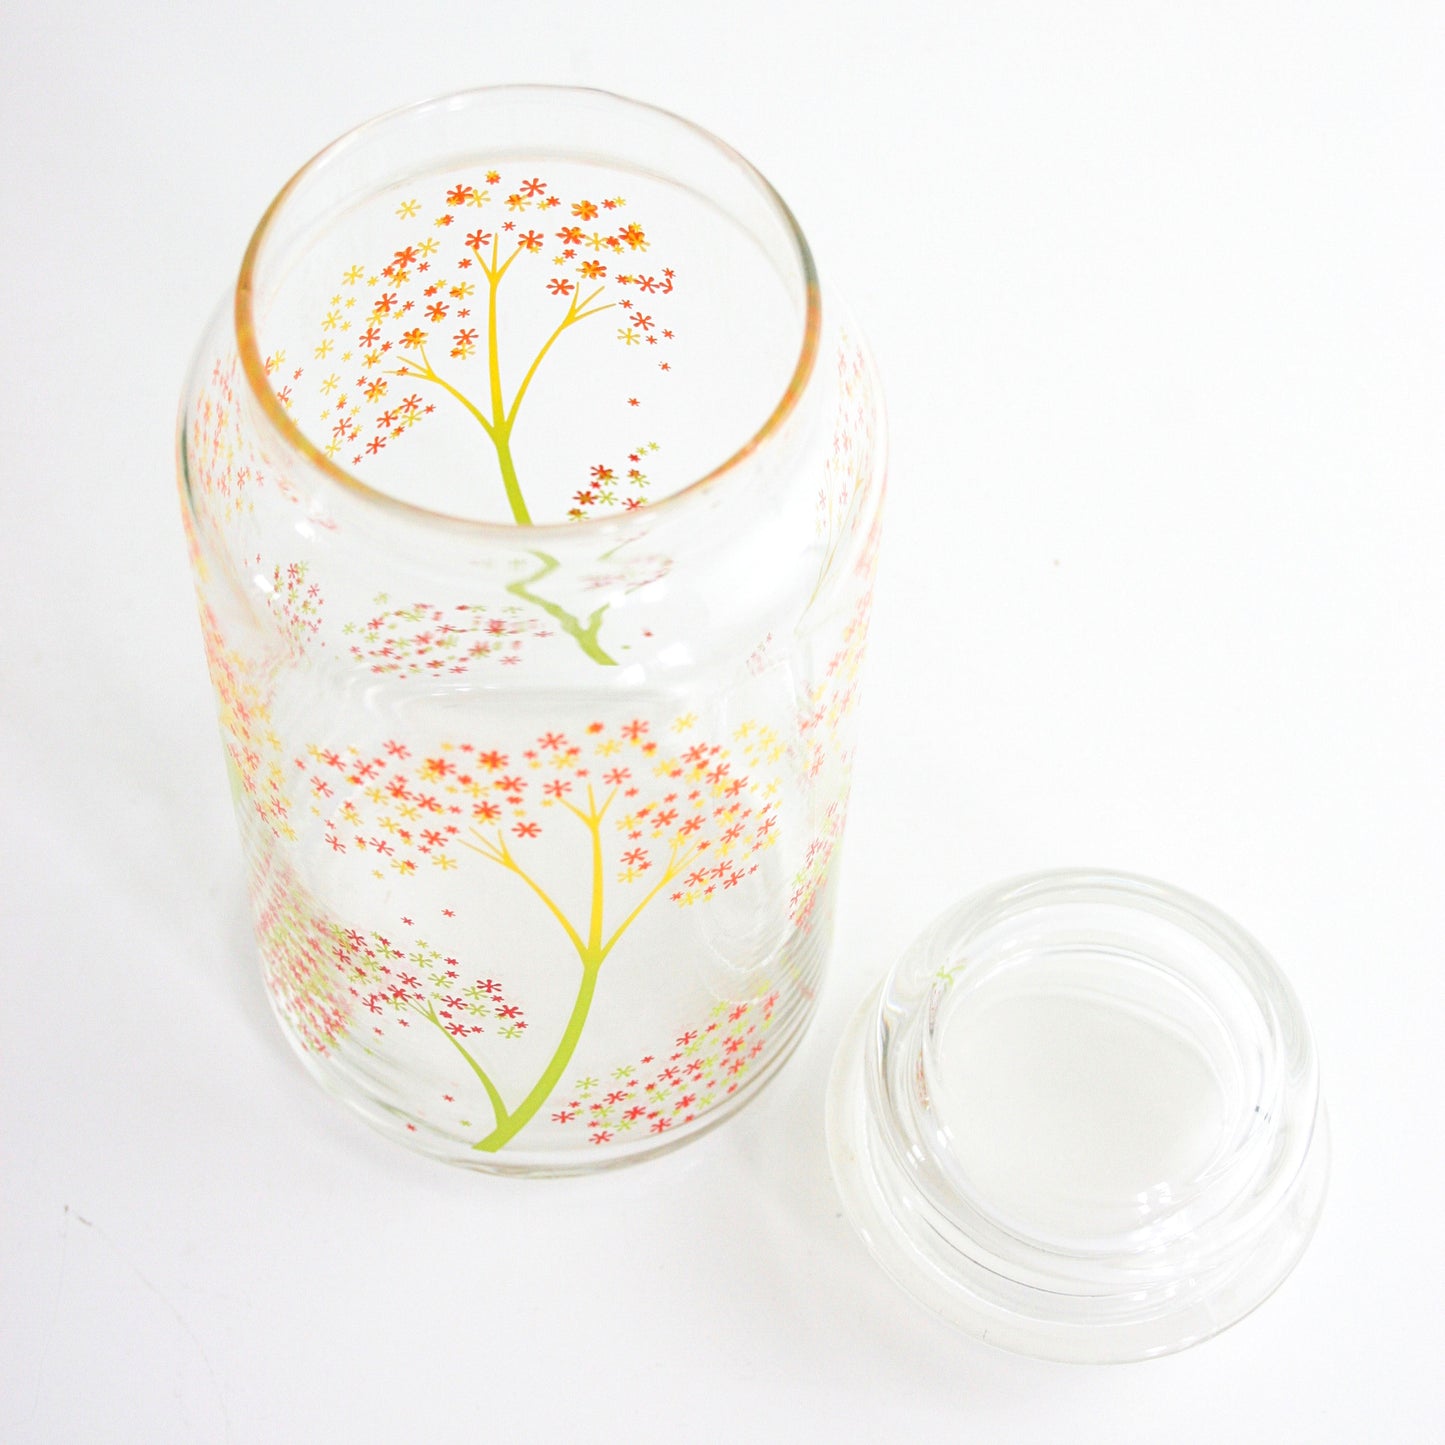 SOLD - Vintage Cheery Floral Glass Apothecary Jar